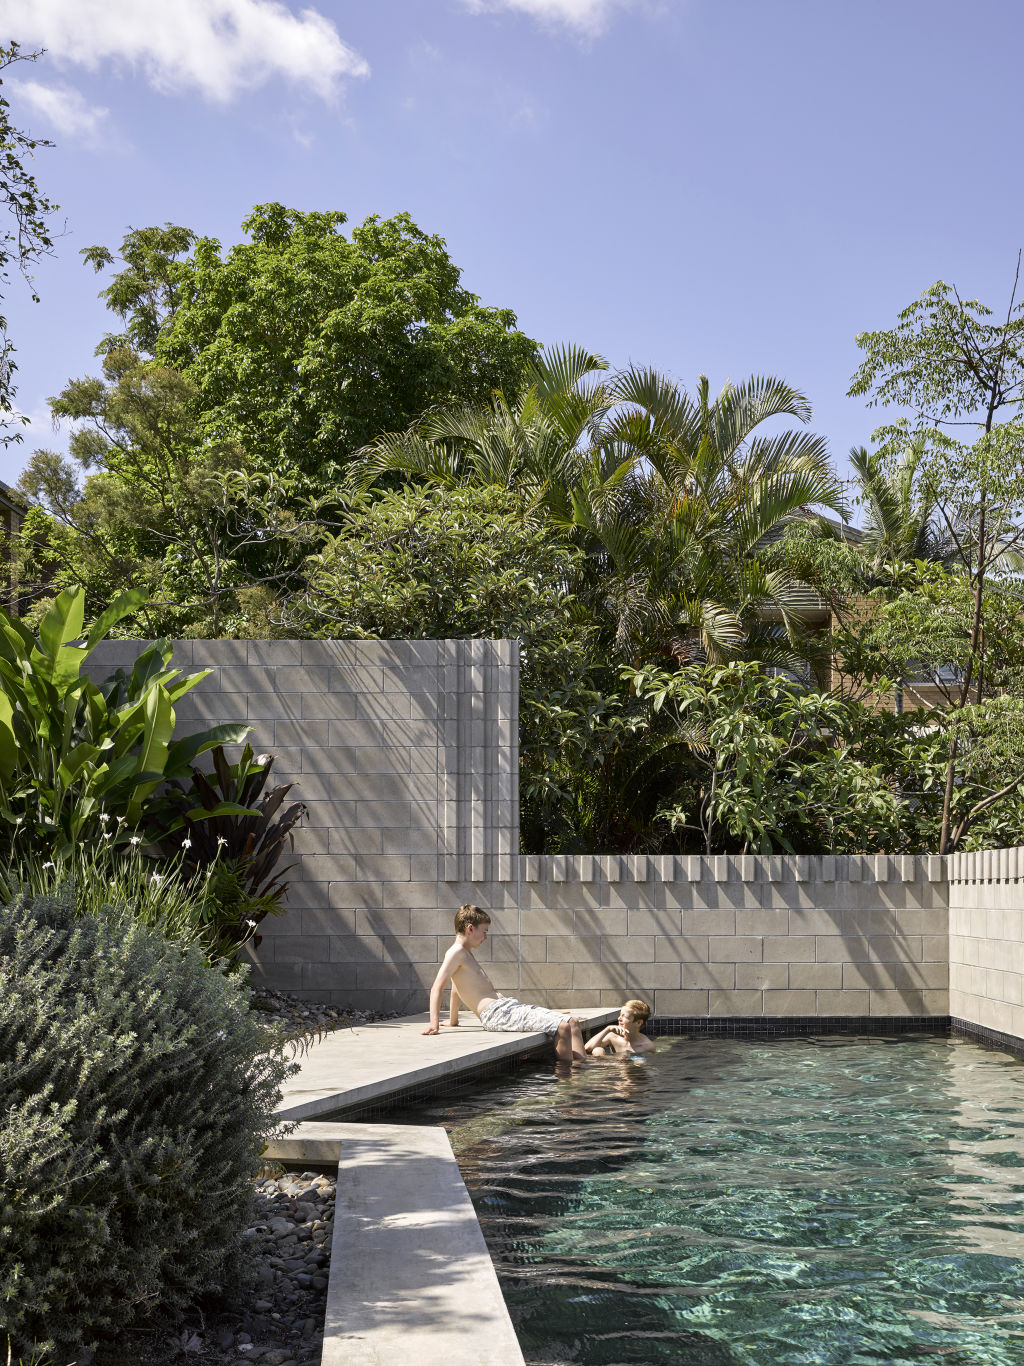 Whynot St Pool and Carport by Kieron Gait Architects with Dan Young Landscape Architecture. Photo: Christopher Frederick Jones